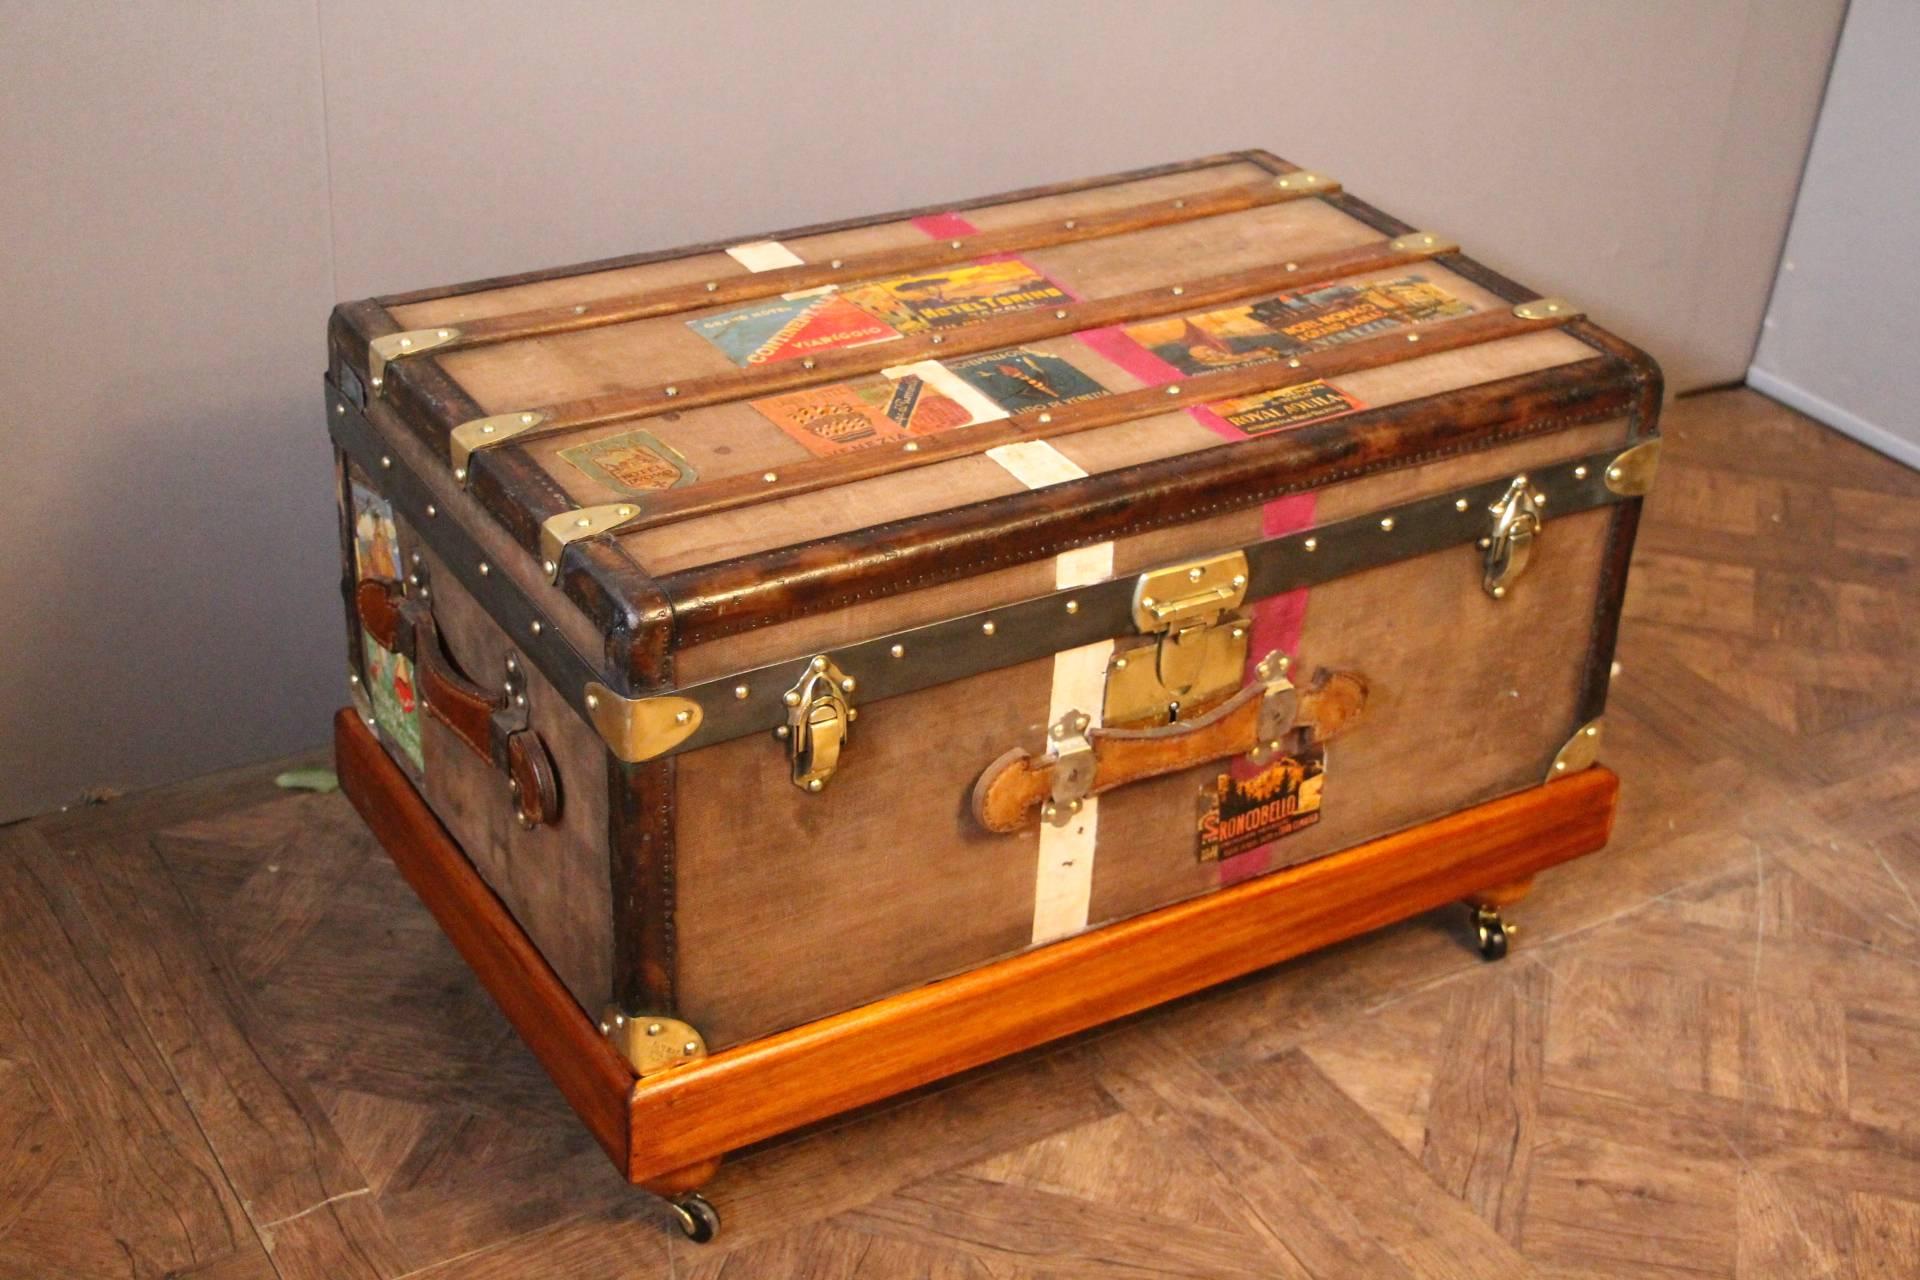 This nice steamer trunk features brown canvas, leather trim and side handles and brass corners and locks.
Many travel labels and white and pink stripes of customization.
Its main lock as well as its corners are marked 